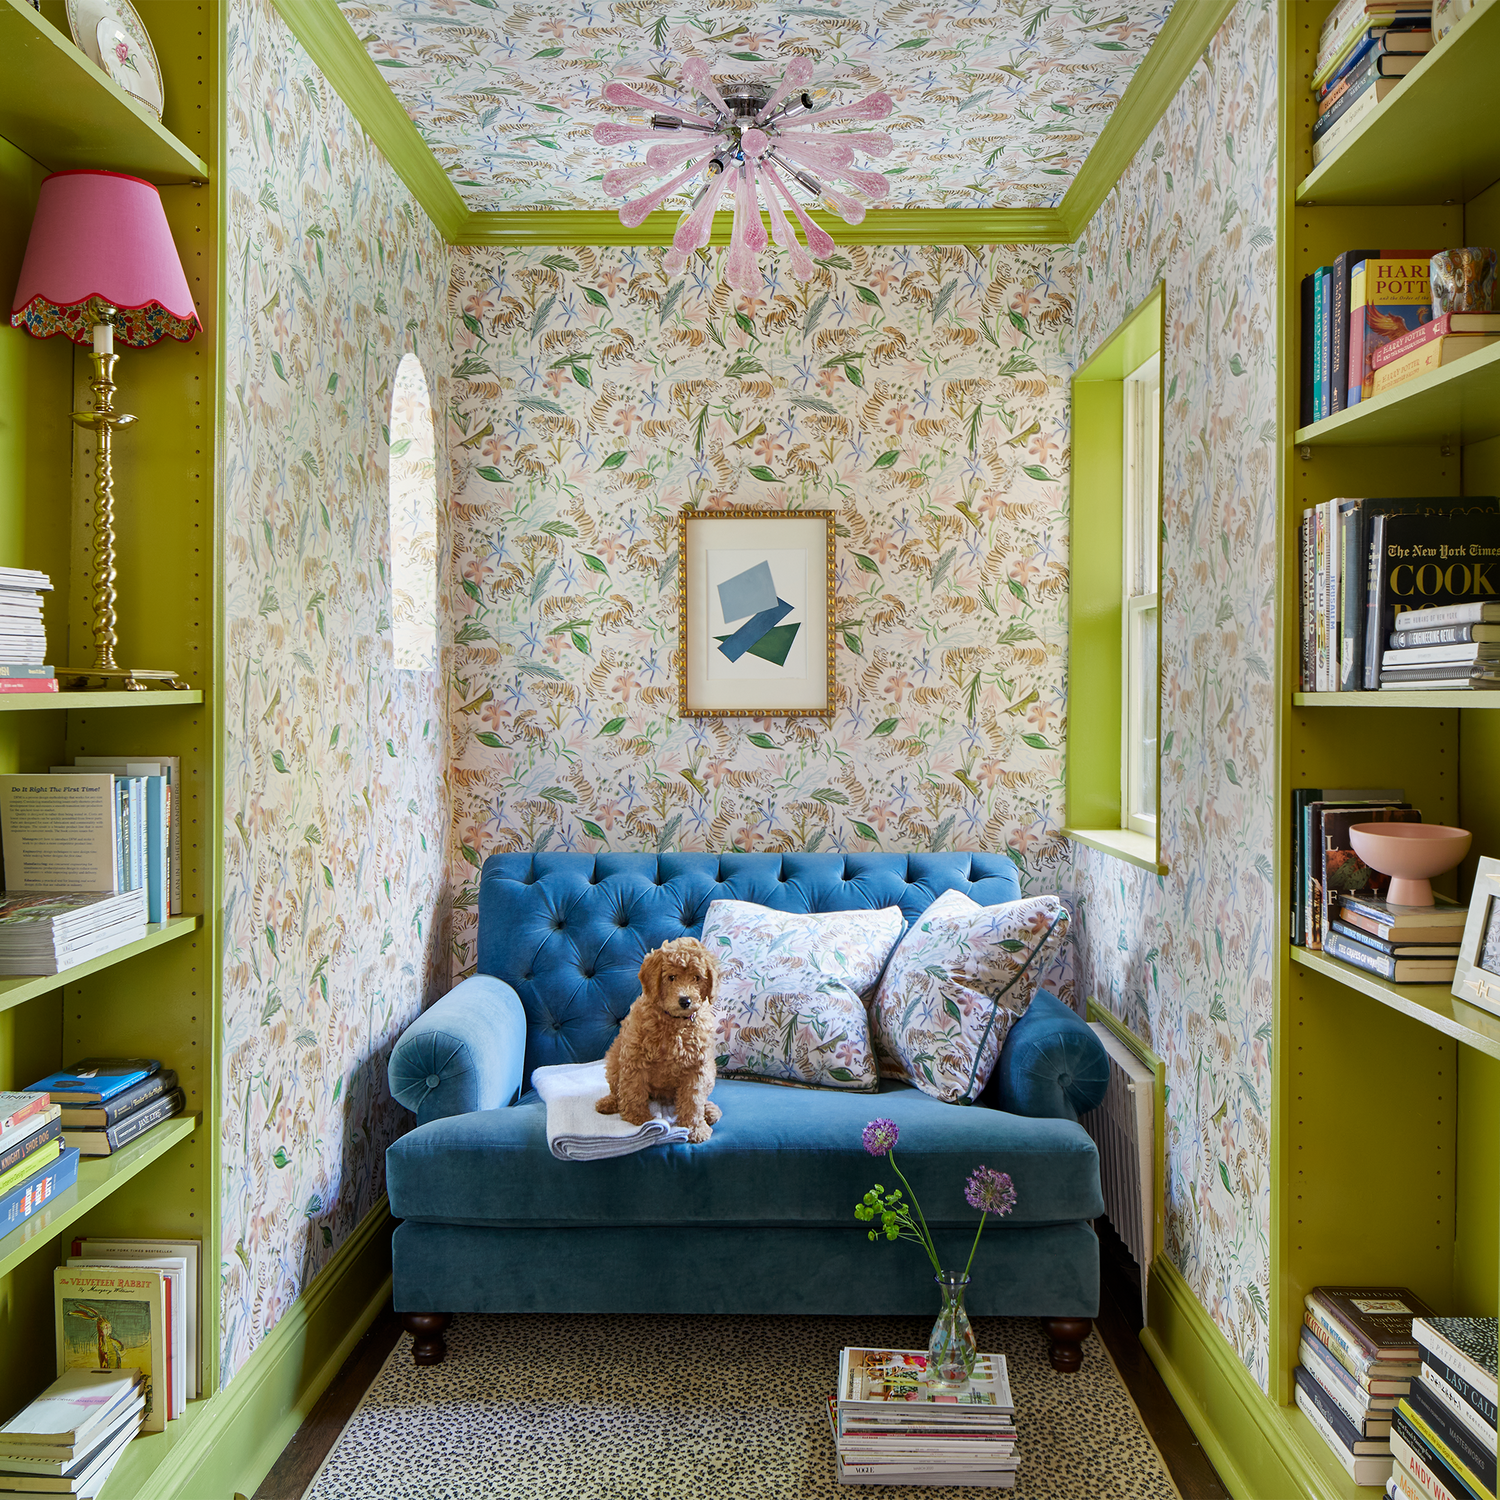 Library corner with books on shelves styled with Pink Chinoiserie Tiger Printed Wallpaper and blue couch with brown dog and Pink Chinoiserie Tiger Printed Pillows on top